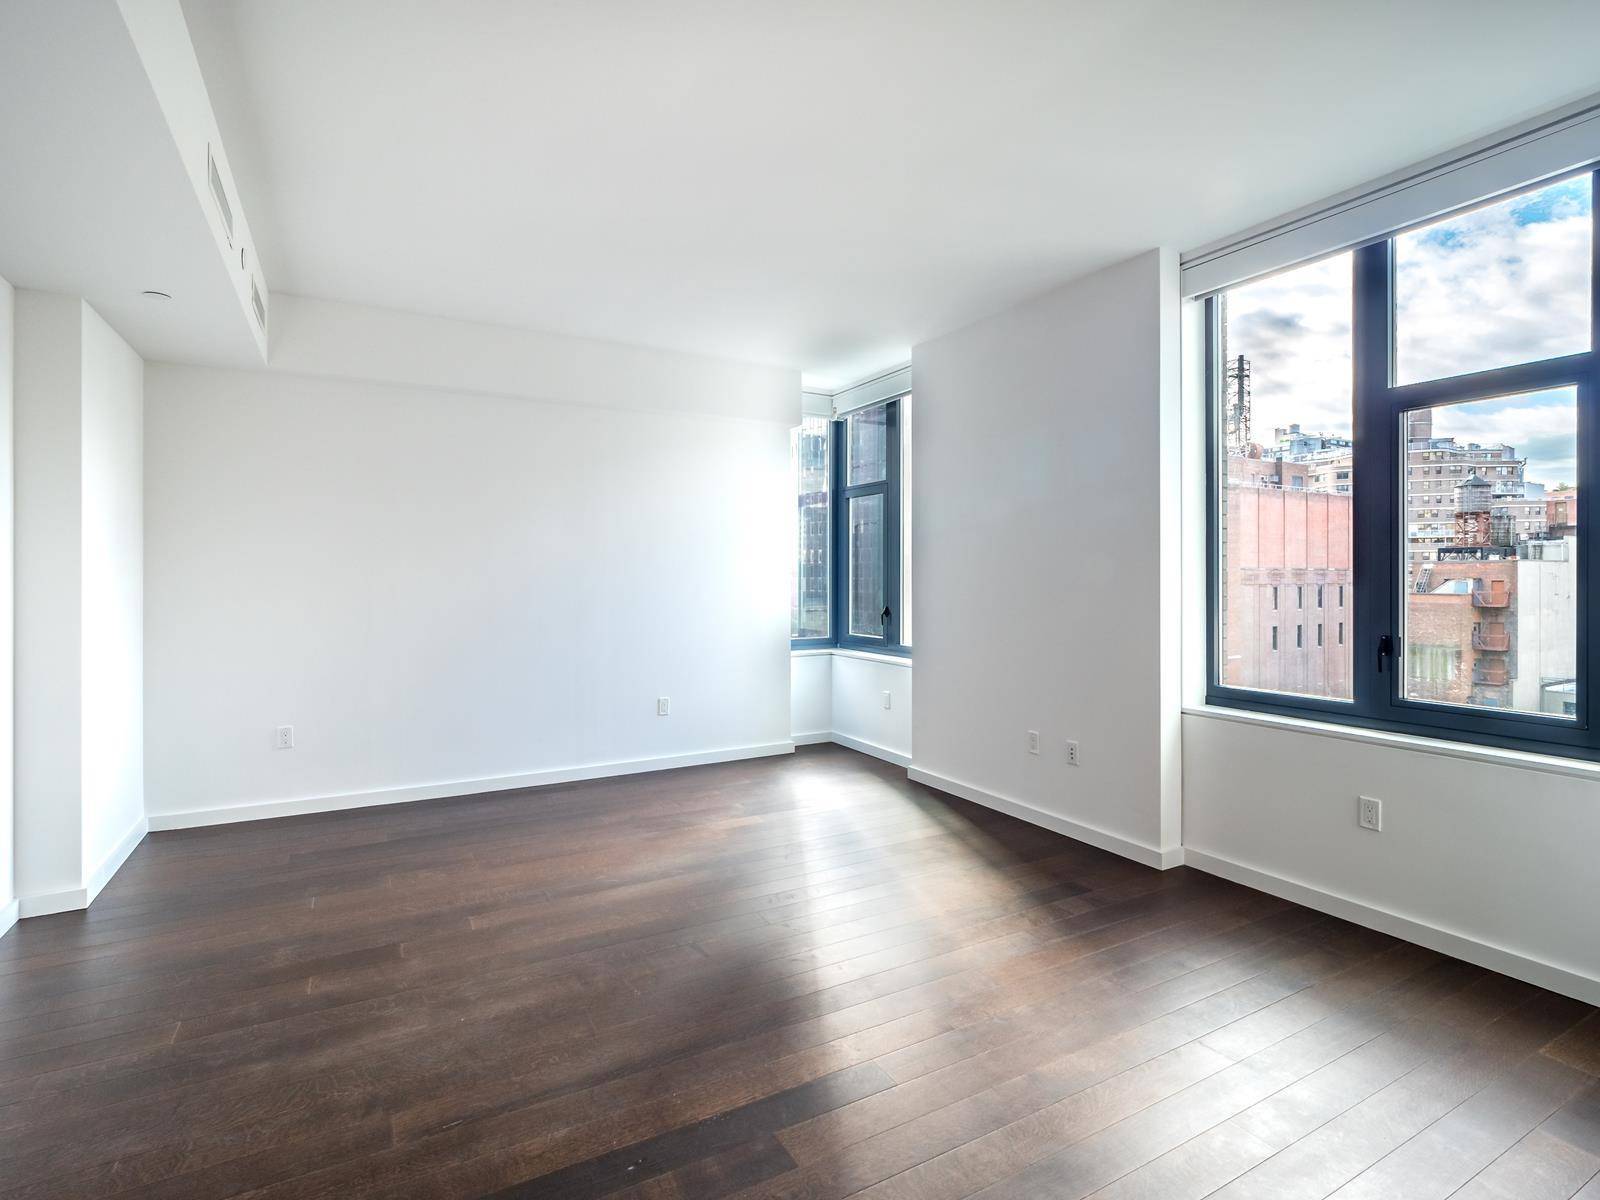 Sunny South faced Large Studio in a High end Condo available Immediately.